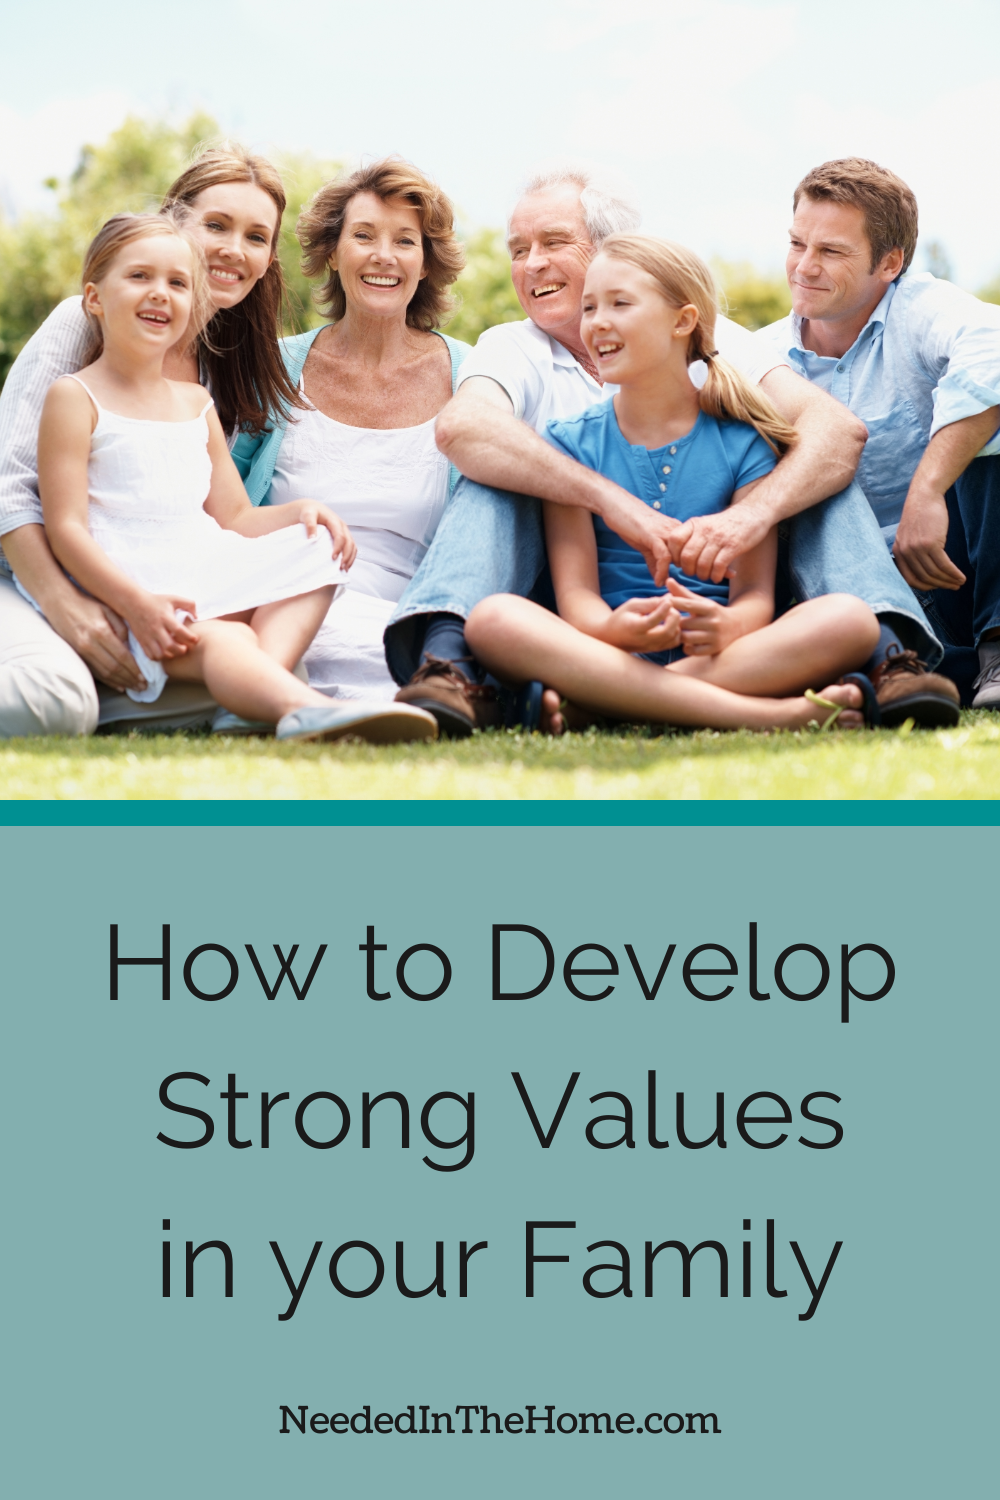 pinterest pin description how to develop strong values in your family grandma grandpa son in law daughter grandaughters sitting on grass smiling neededinthehome